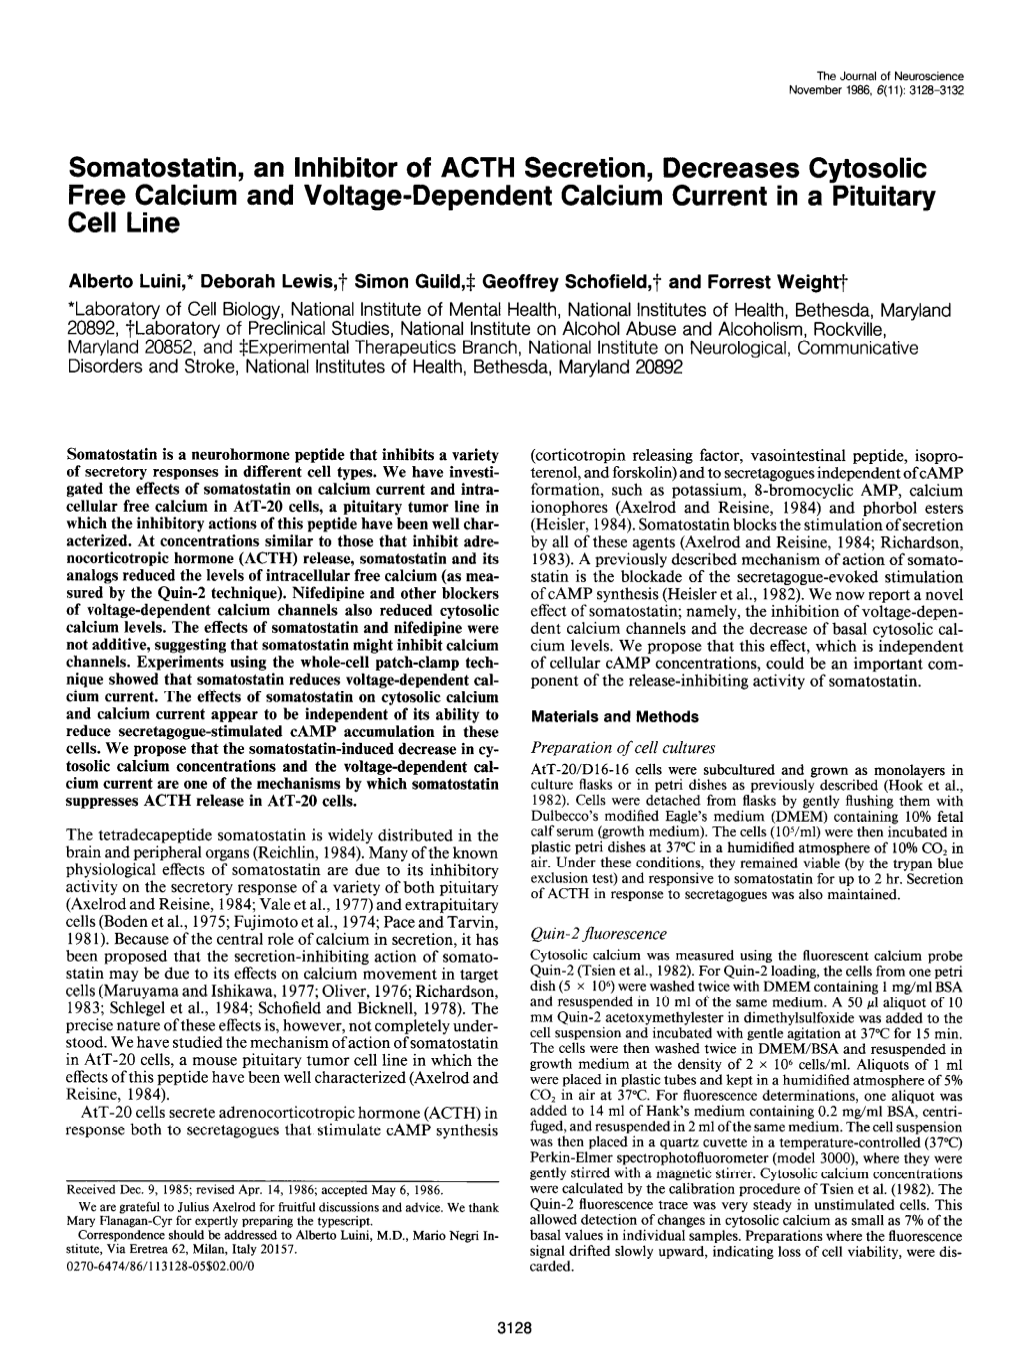 Somatostatin, an Inhibitor of ACTH Secretion, Decreases Cytosolic Free Calcium and Voltage-Dependent Calcium Current in a Pituitary Cell Line